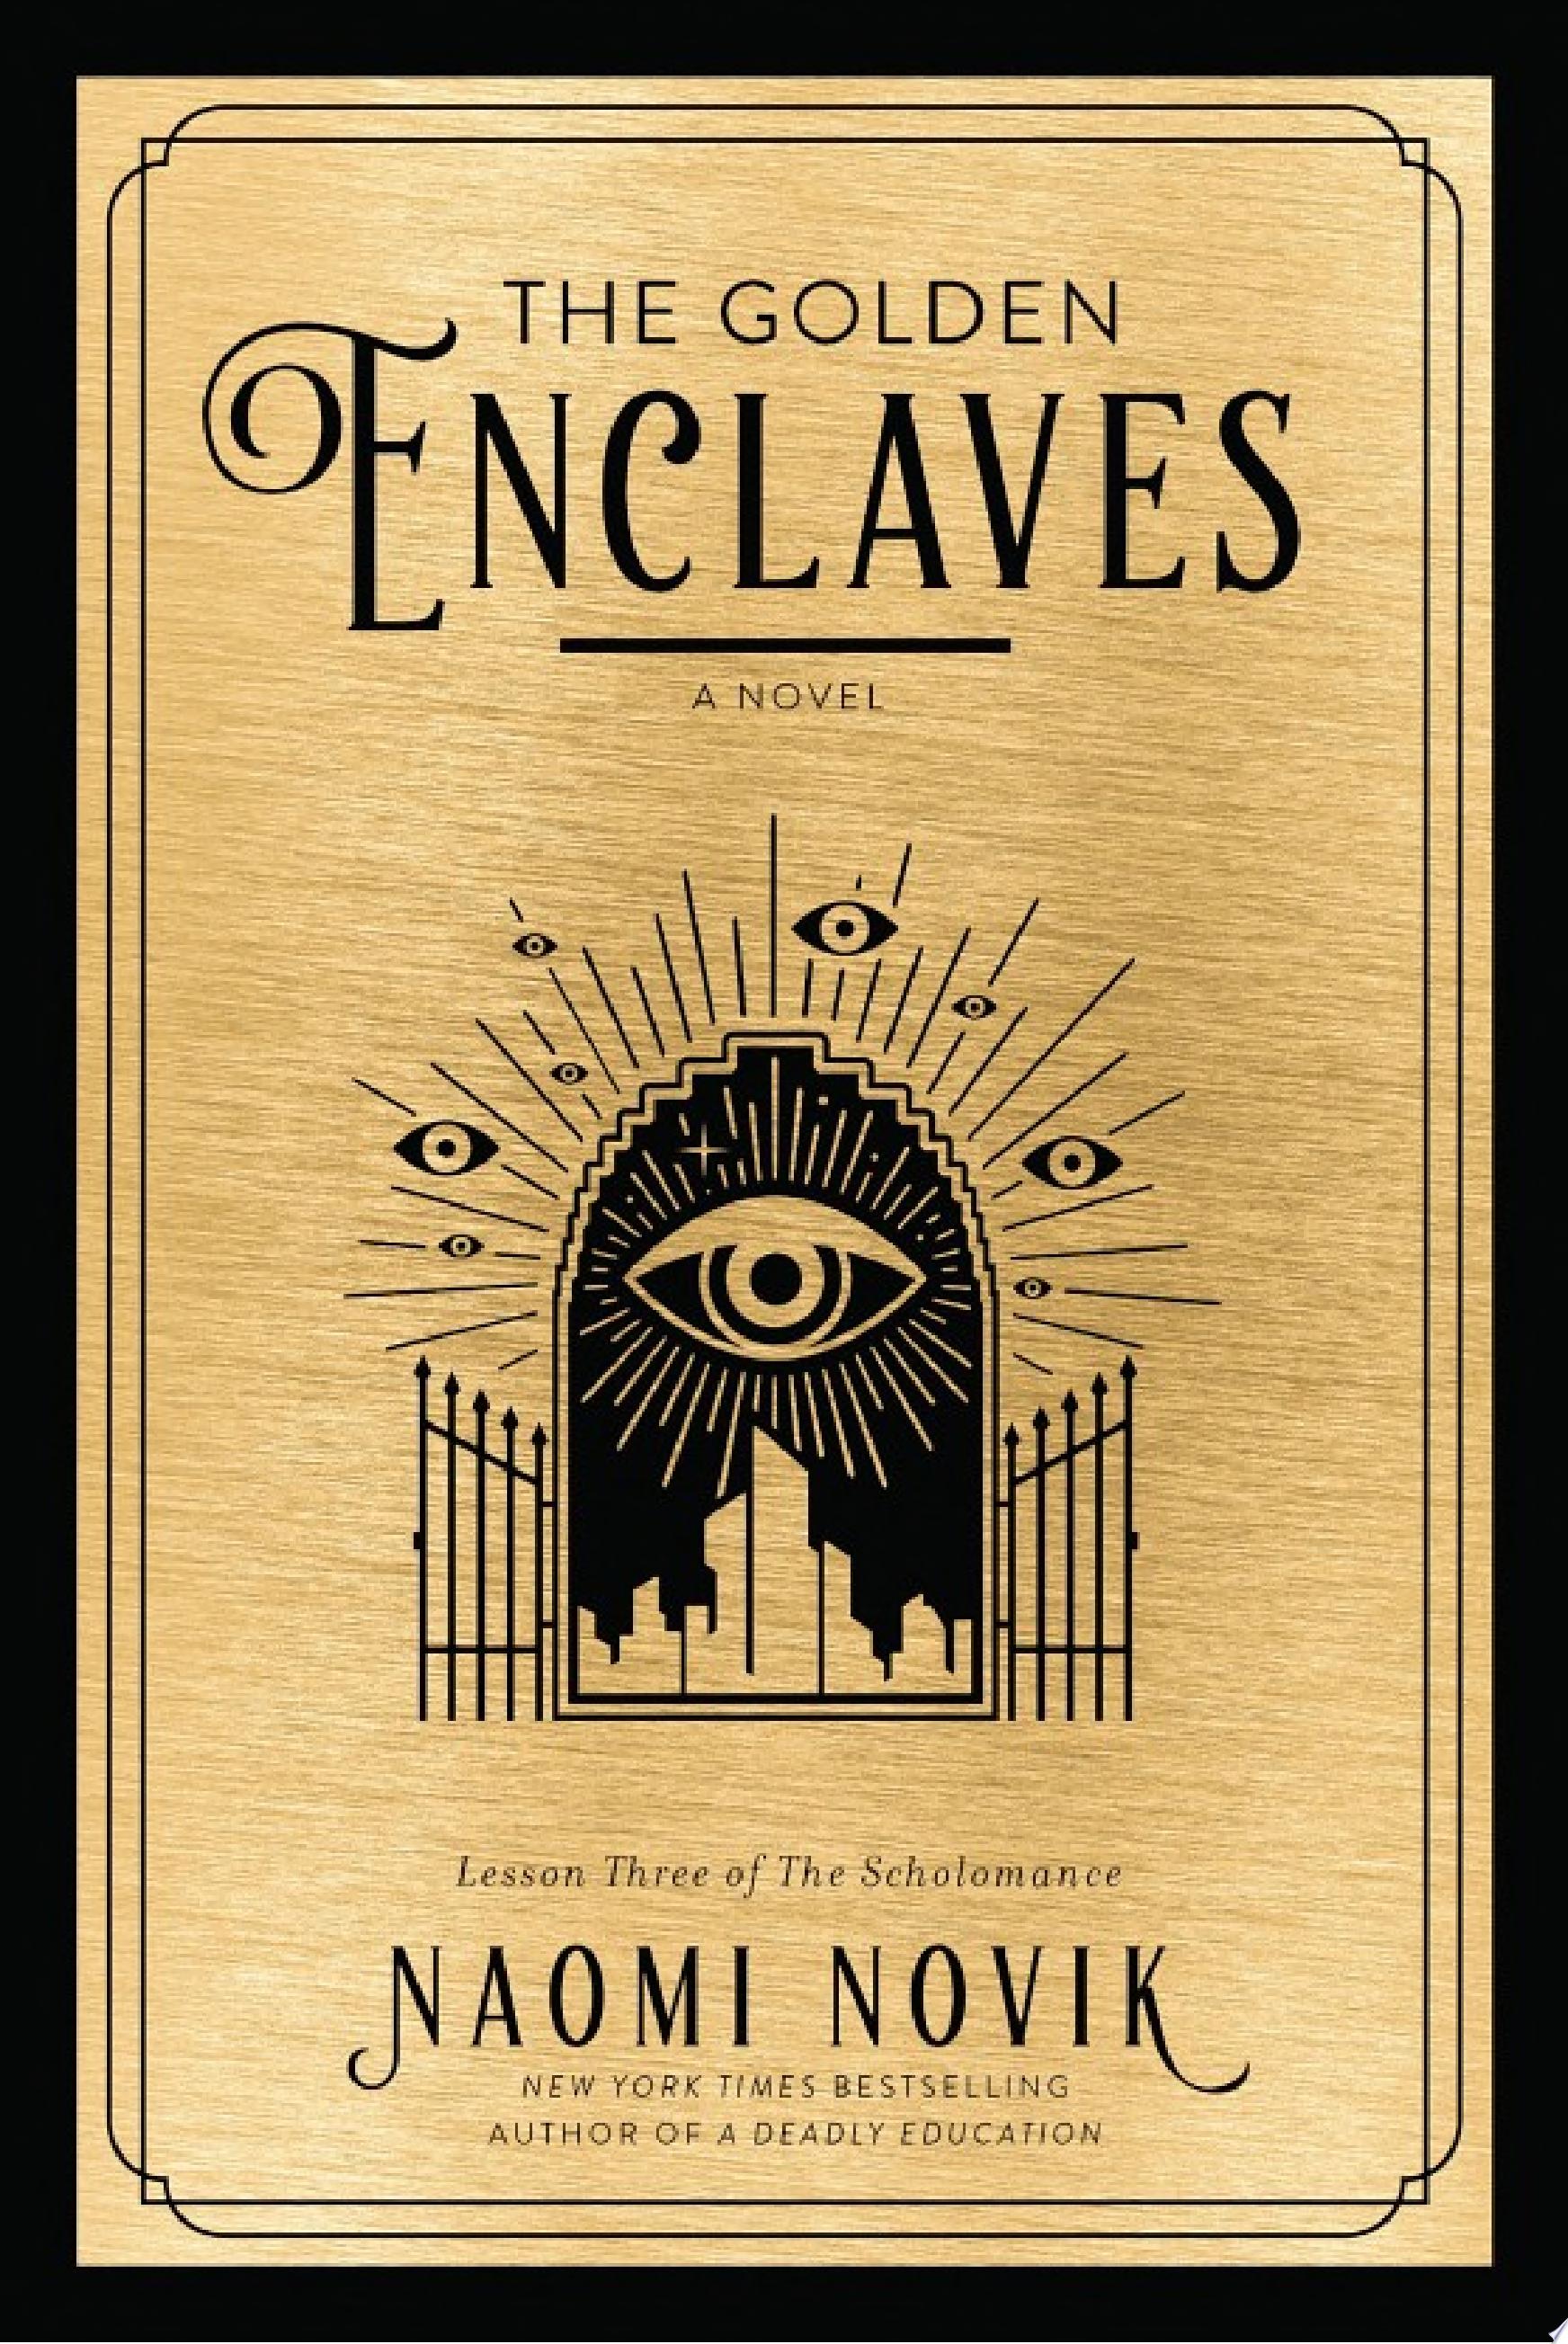 Image for "The Golden Enclaves"